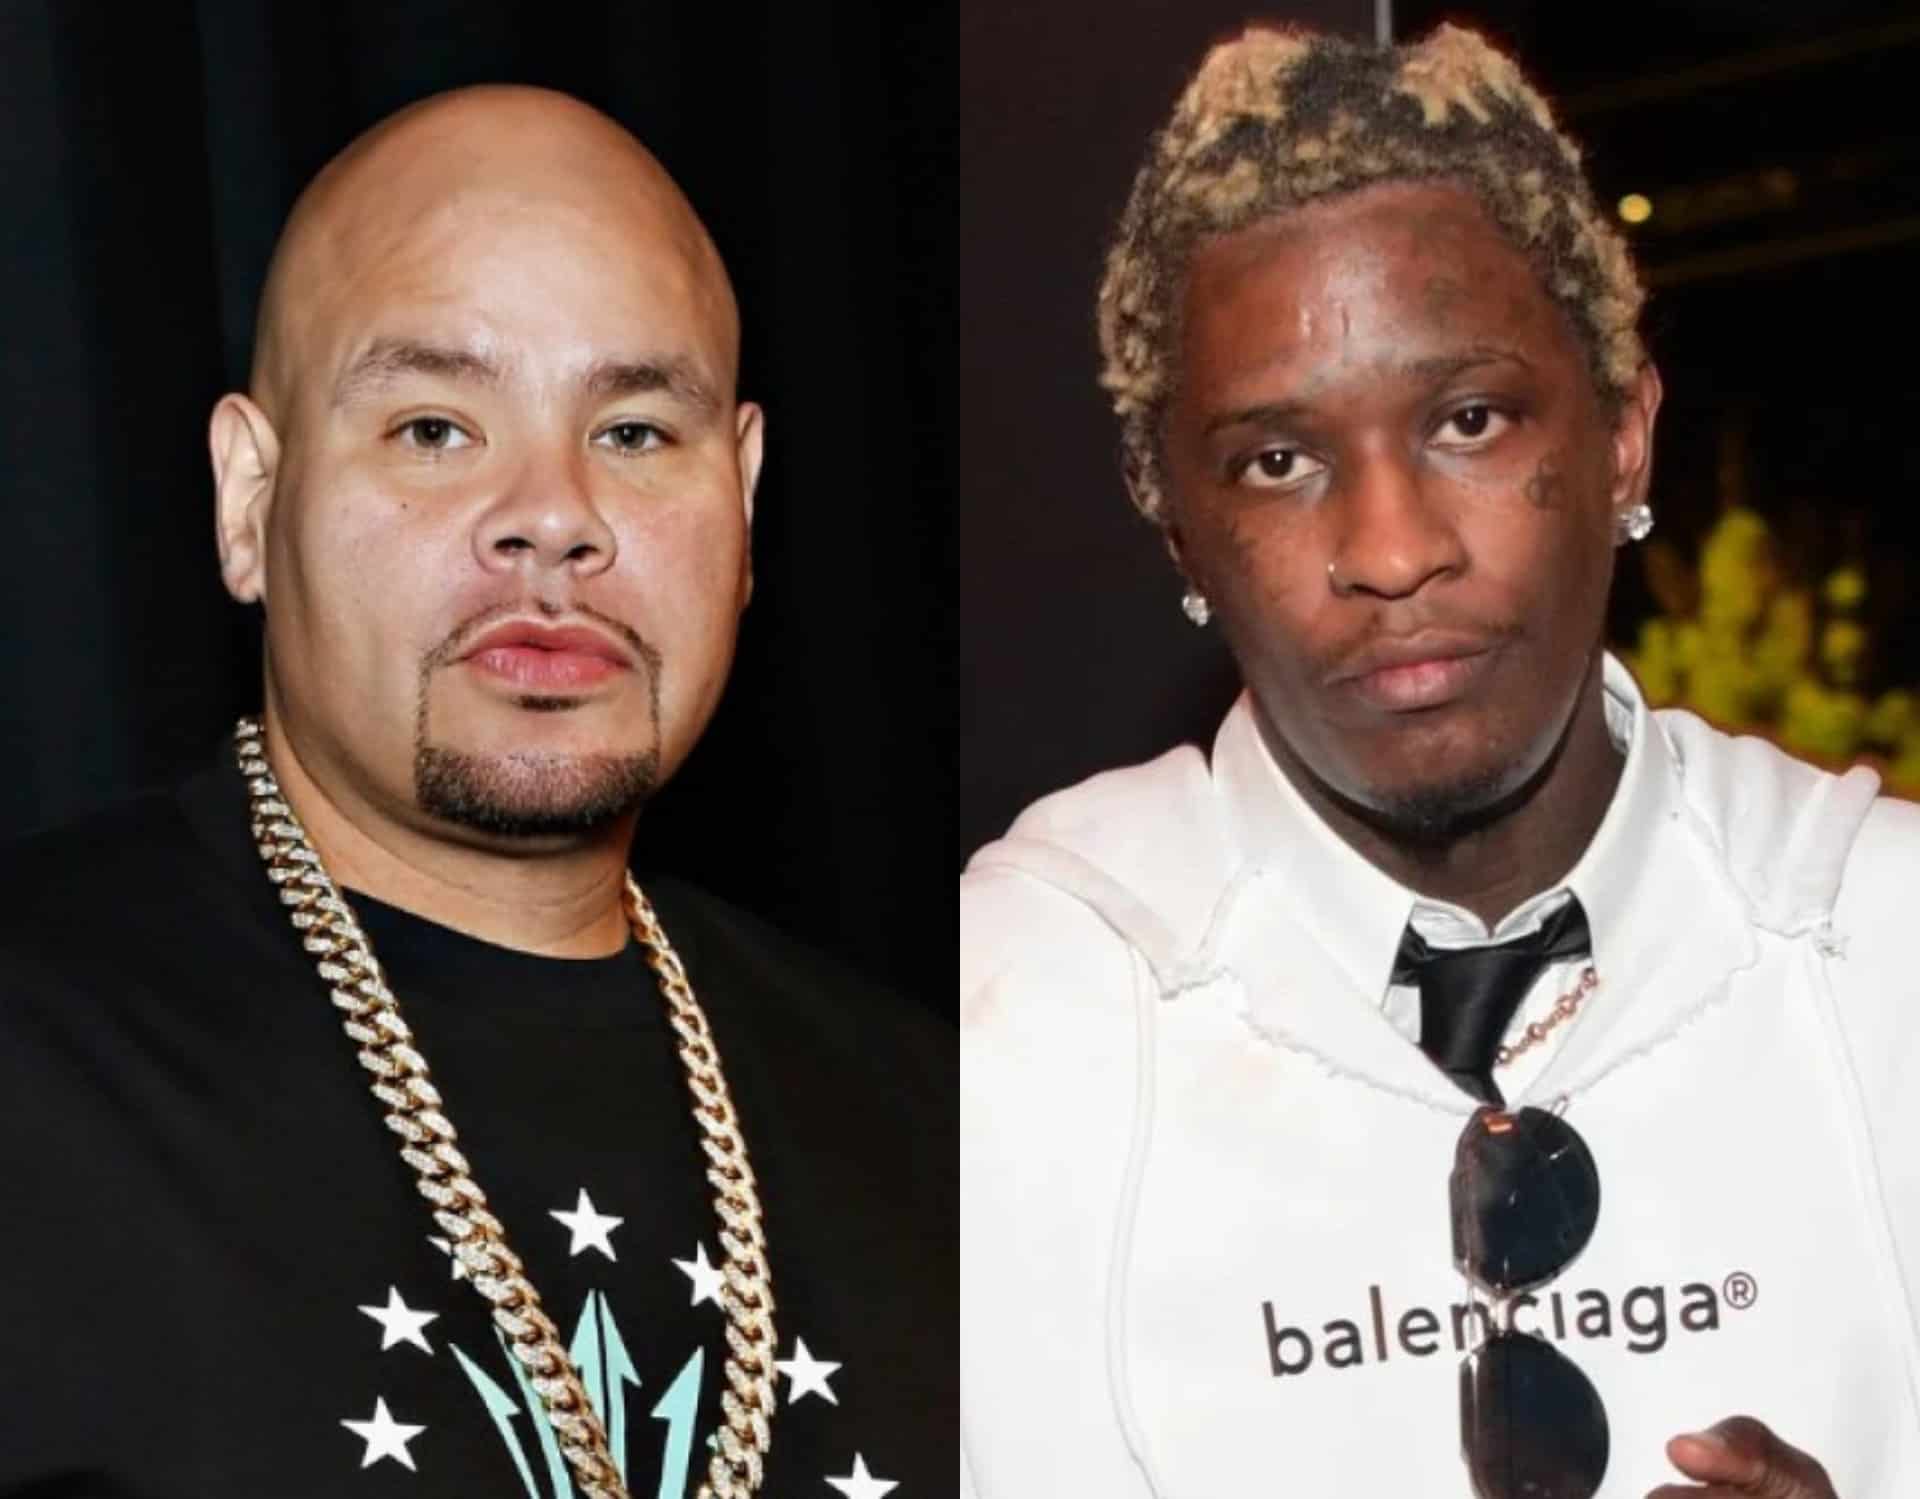 Fat Joe Says He Lied In 95 Percent Of His Songs As He Defends Young Thug